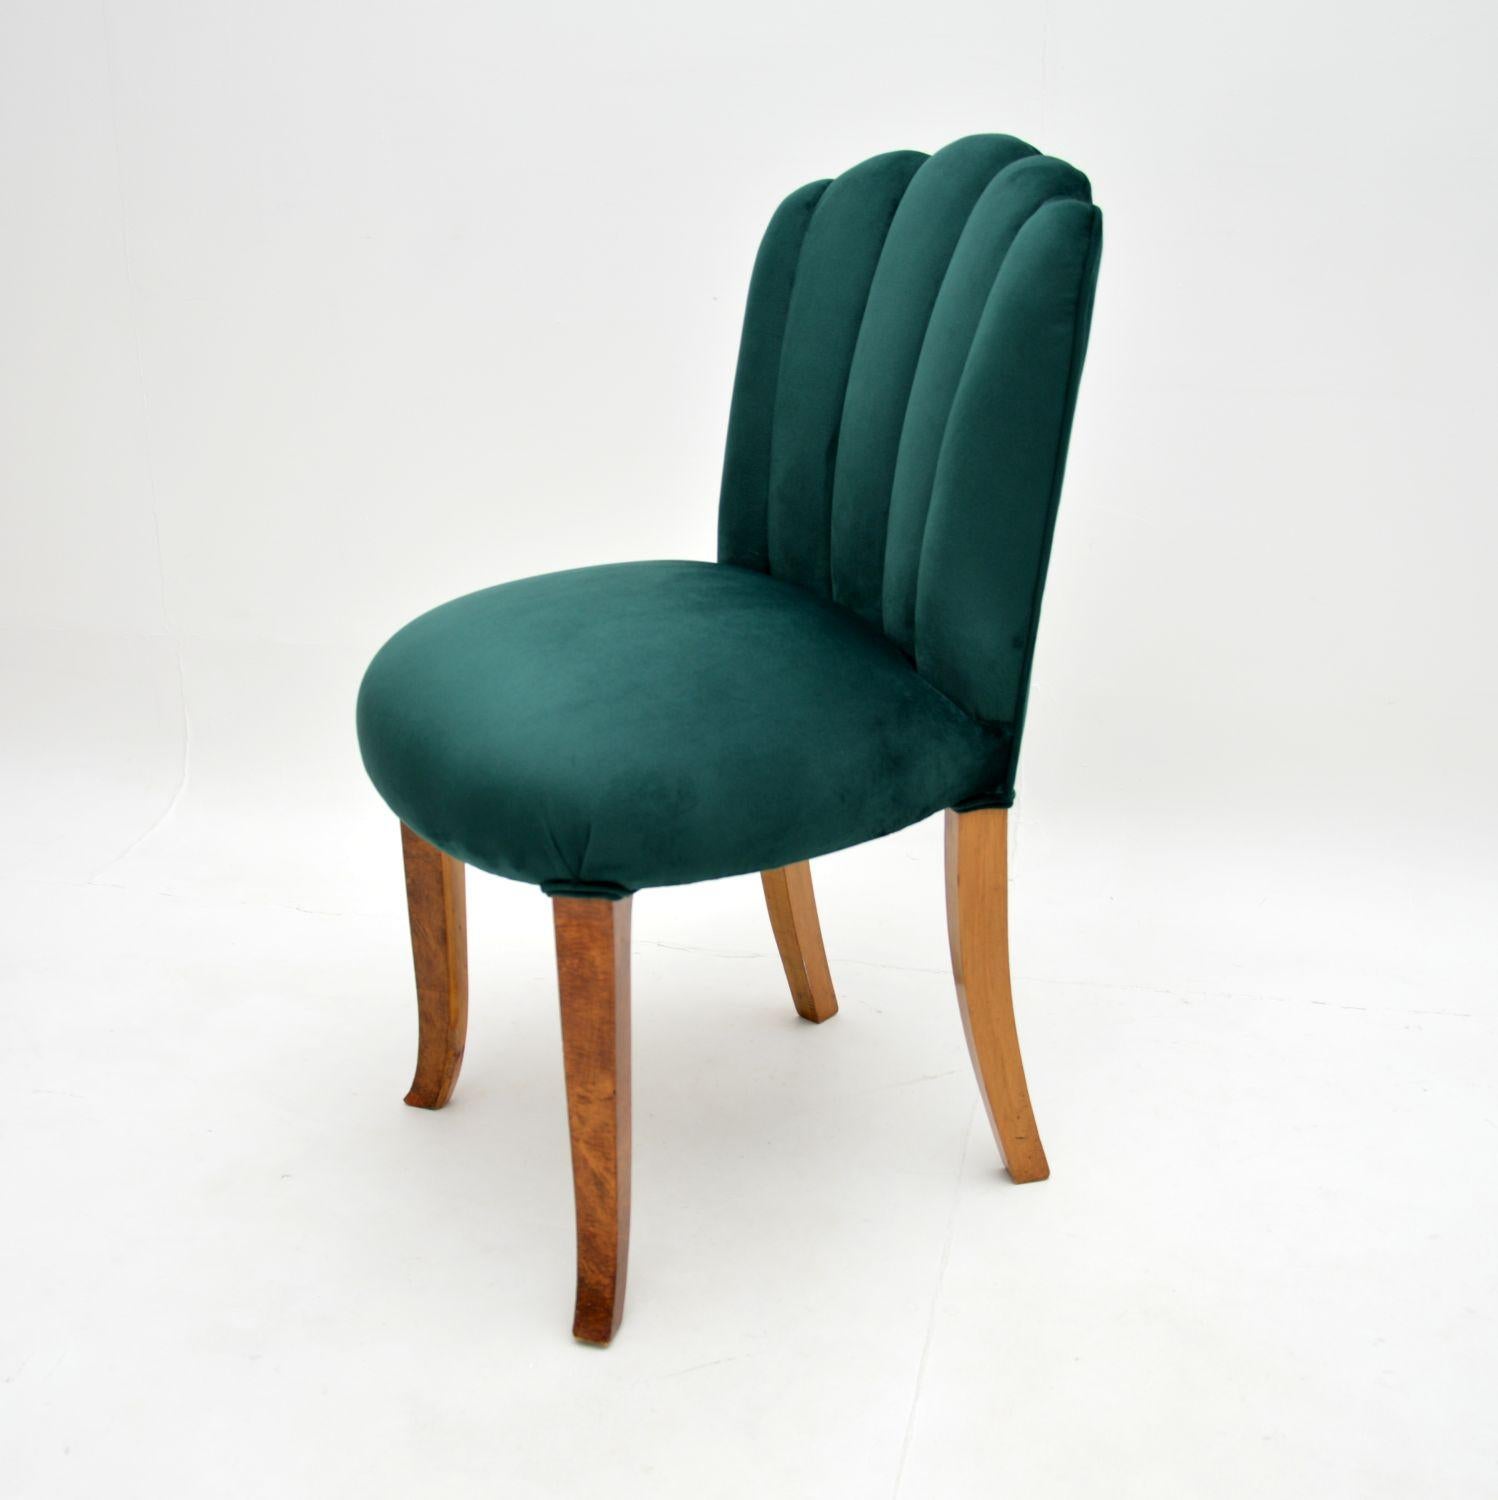 Early 20th Century Art Deco Period Scallop Back Chair